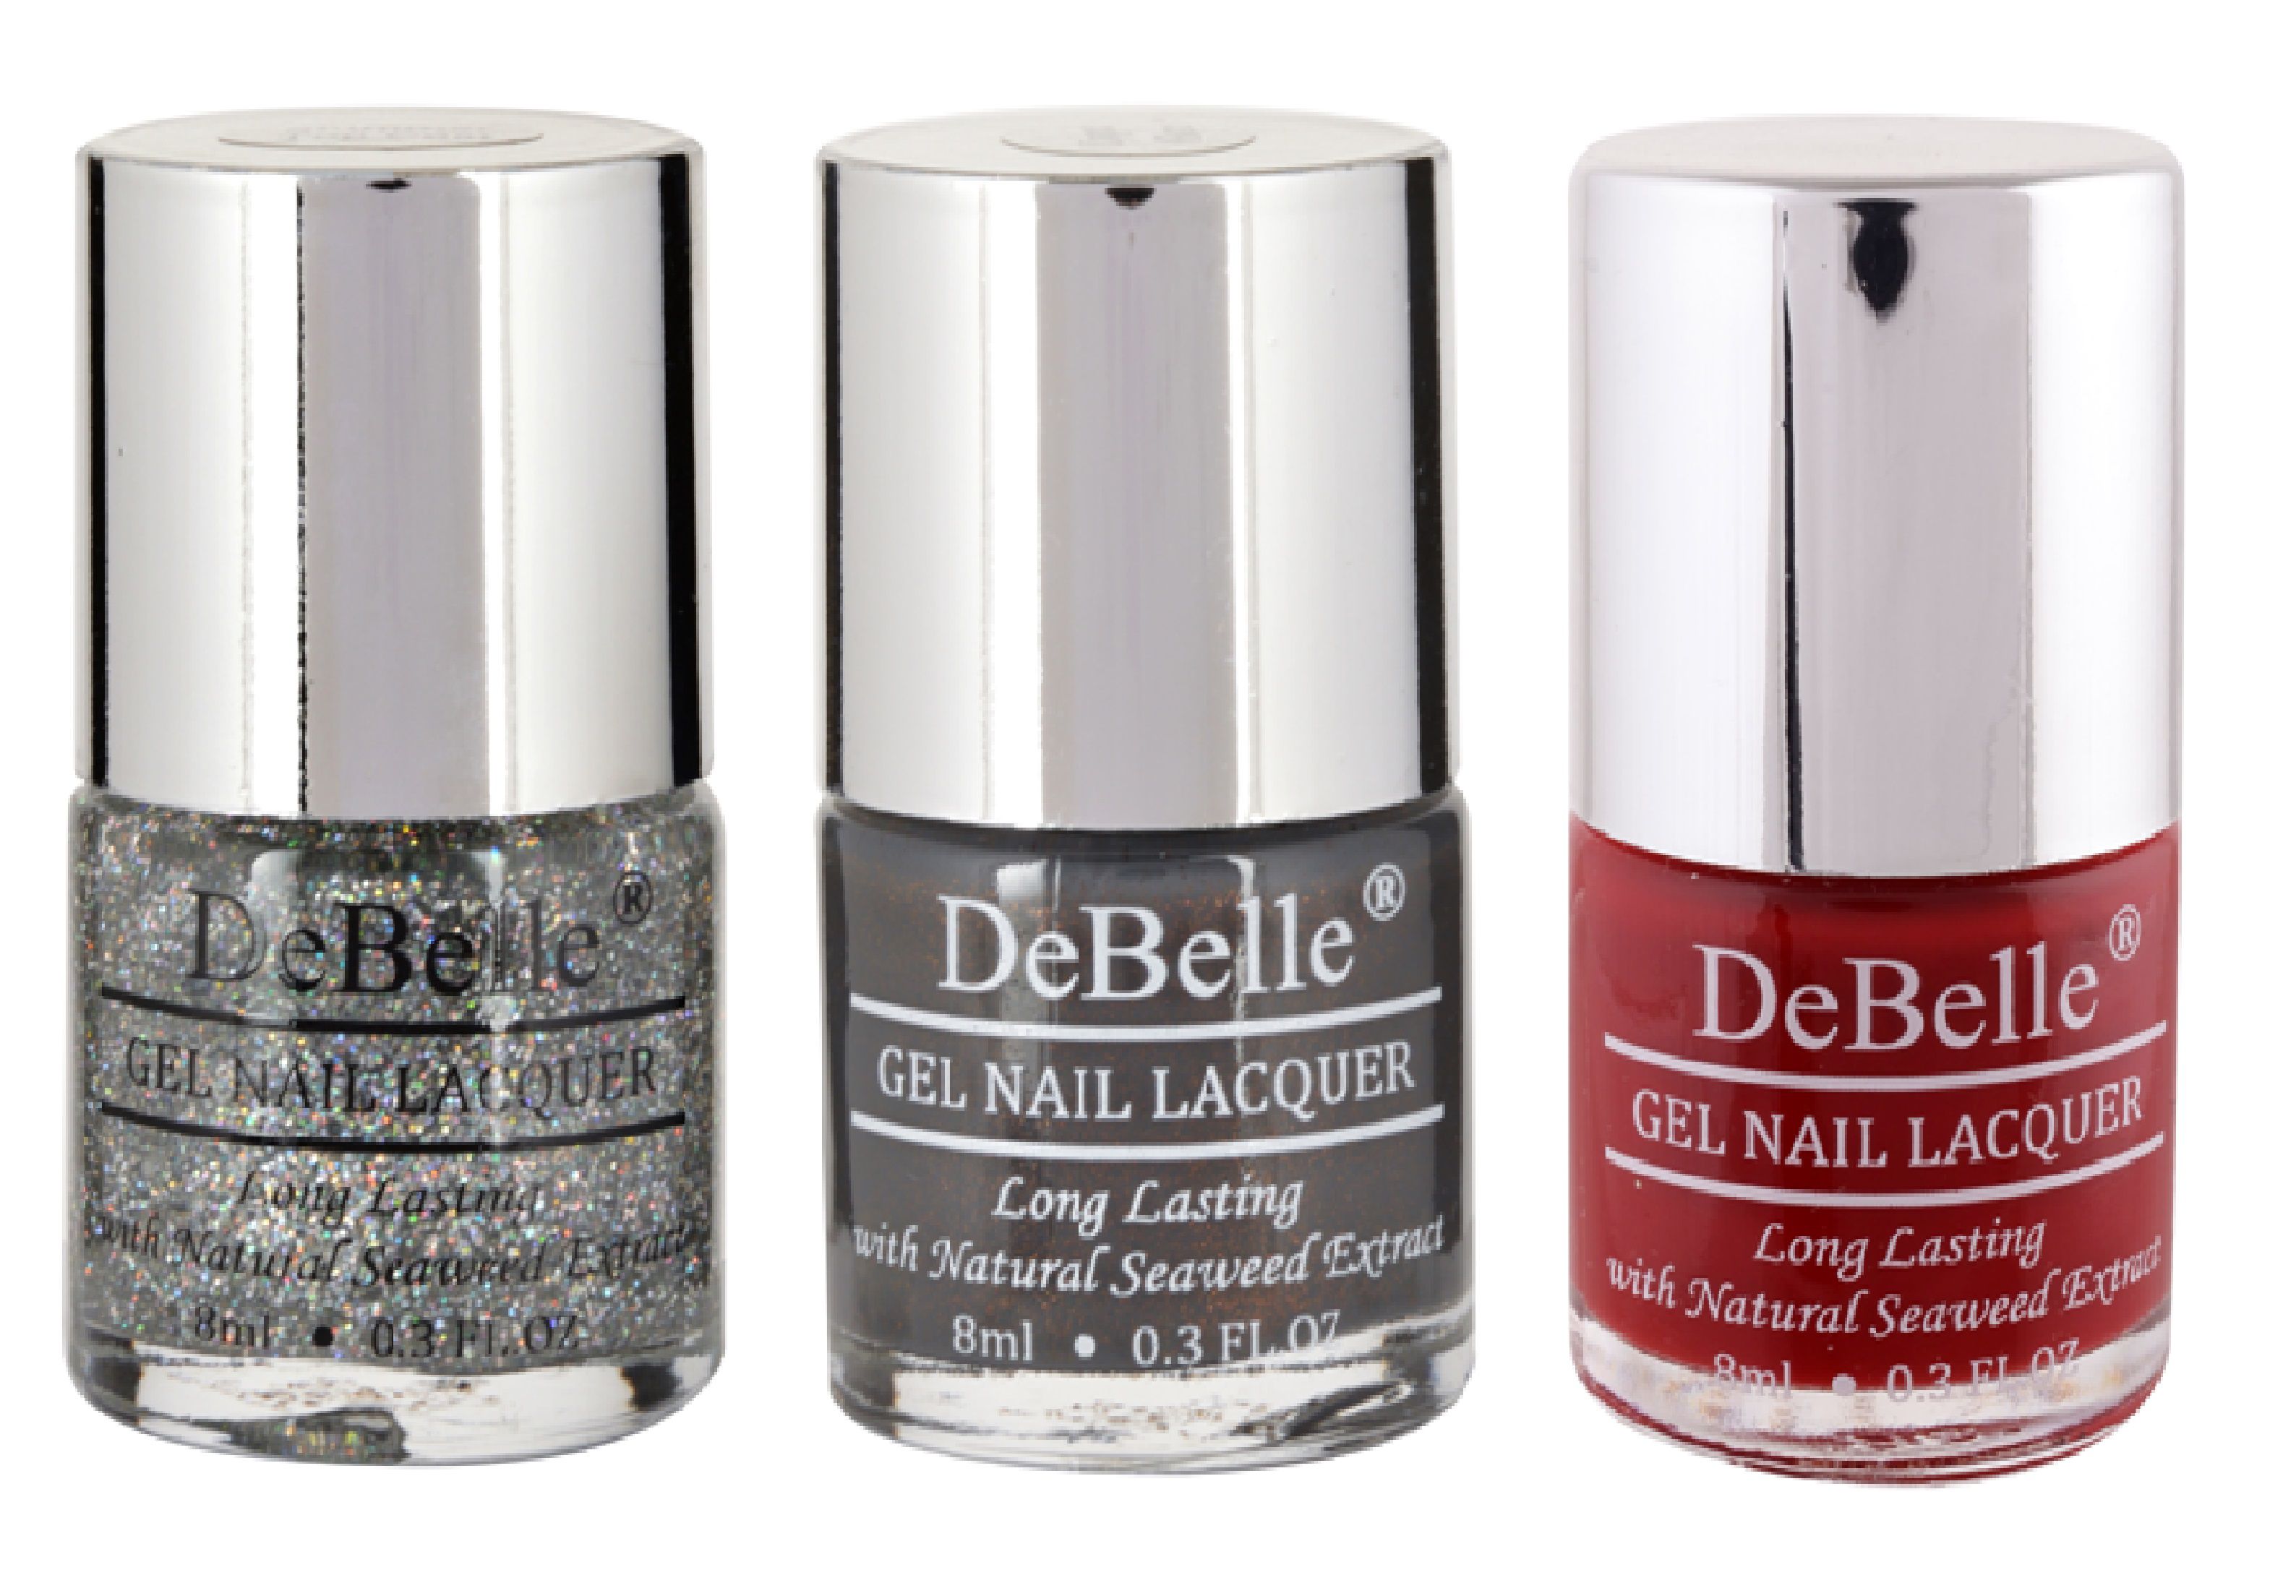     			DeBelle Top Coat, CopperGlaze, MoulinRouge Nail Polish Multi Glossy Pack of 3 24 mL